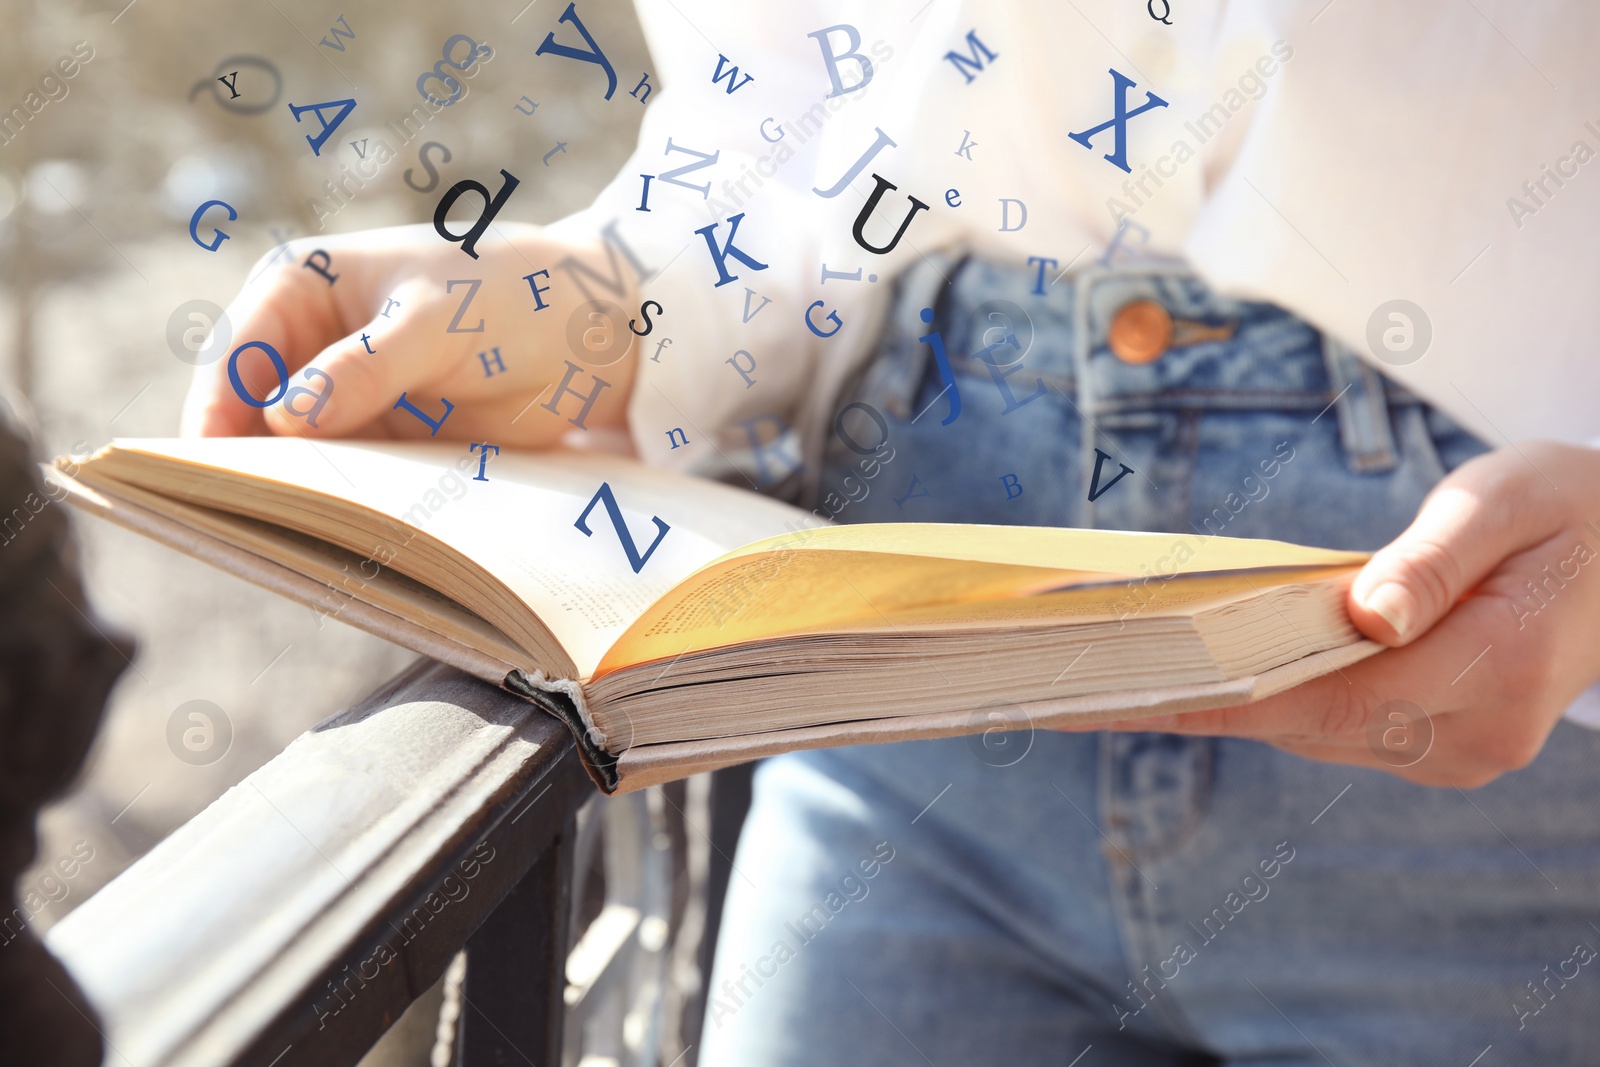 Image of Woman reading book with letters flying over it outdoors on sunny day, closeup